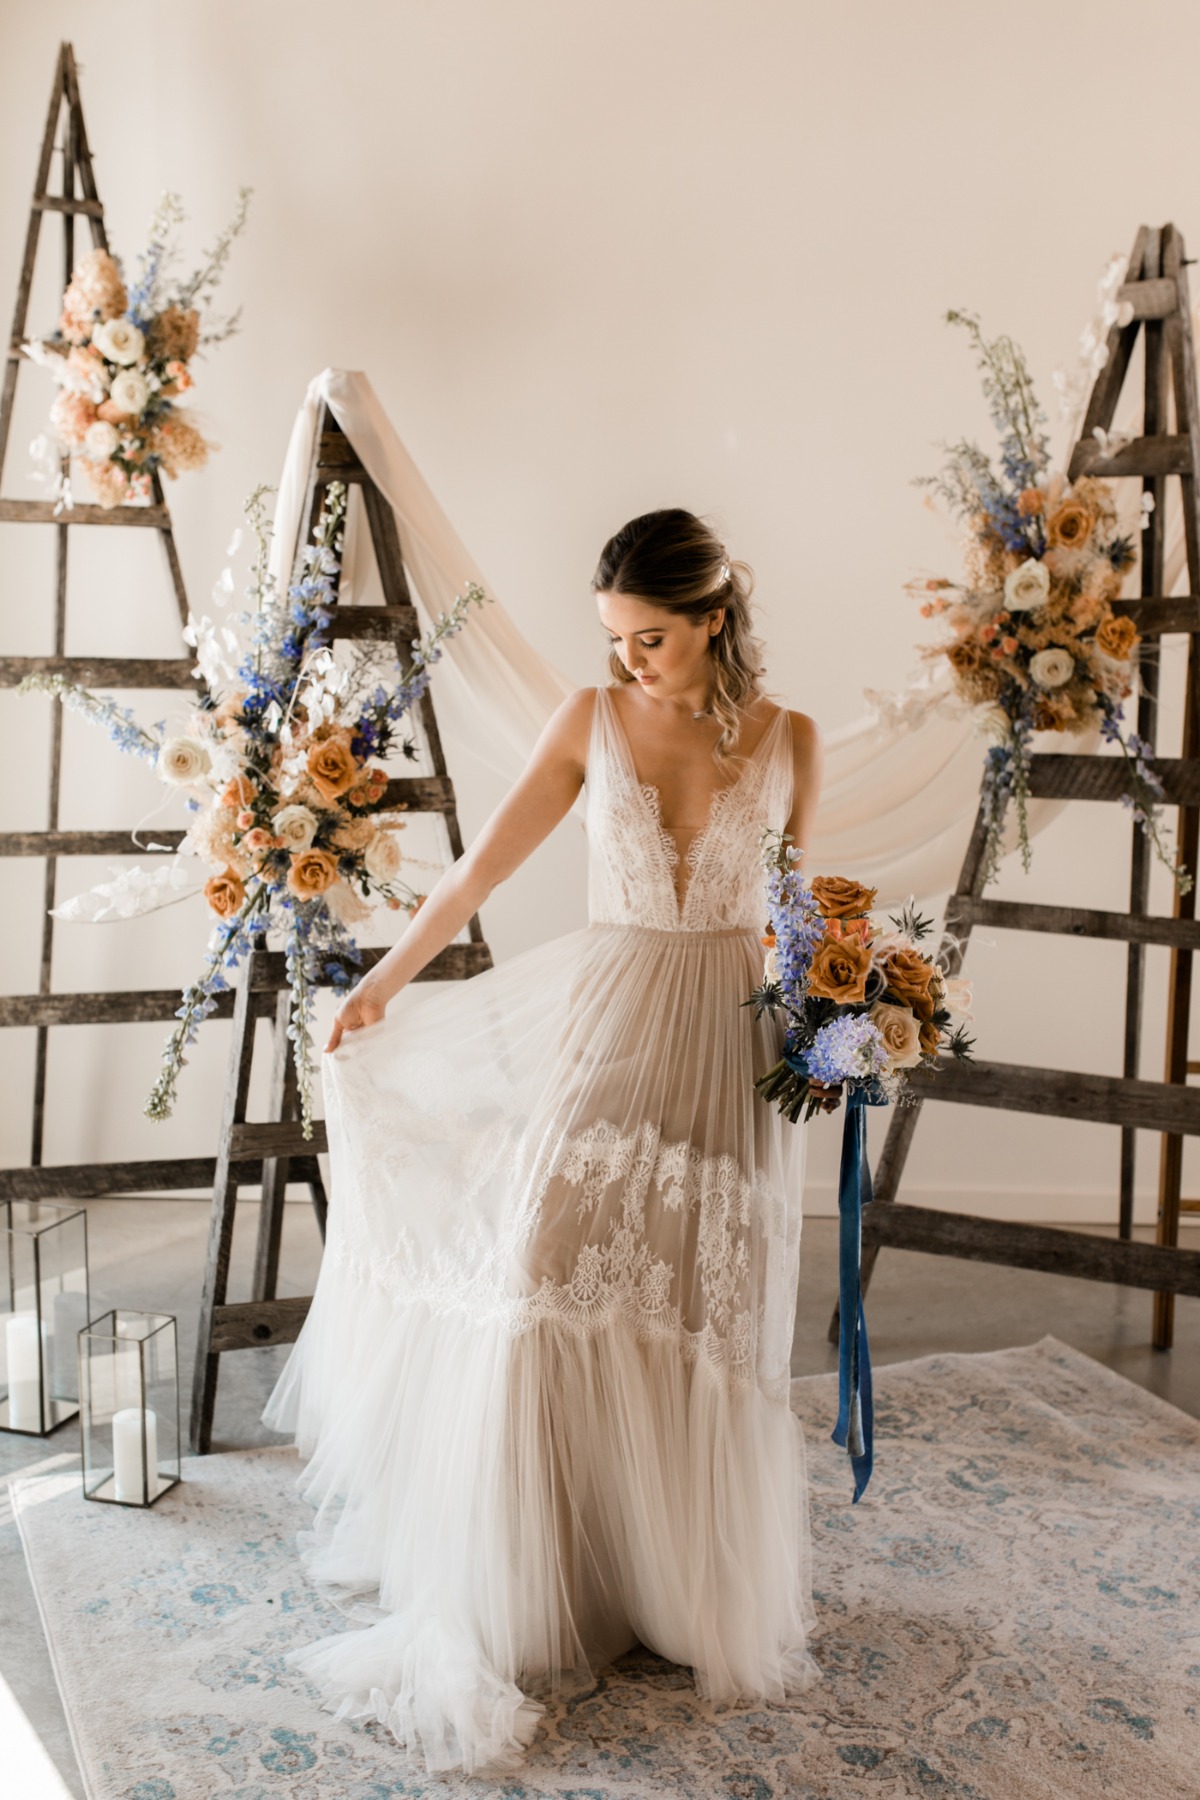 The Clementine wedding dress by Willow